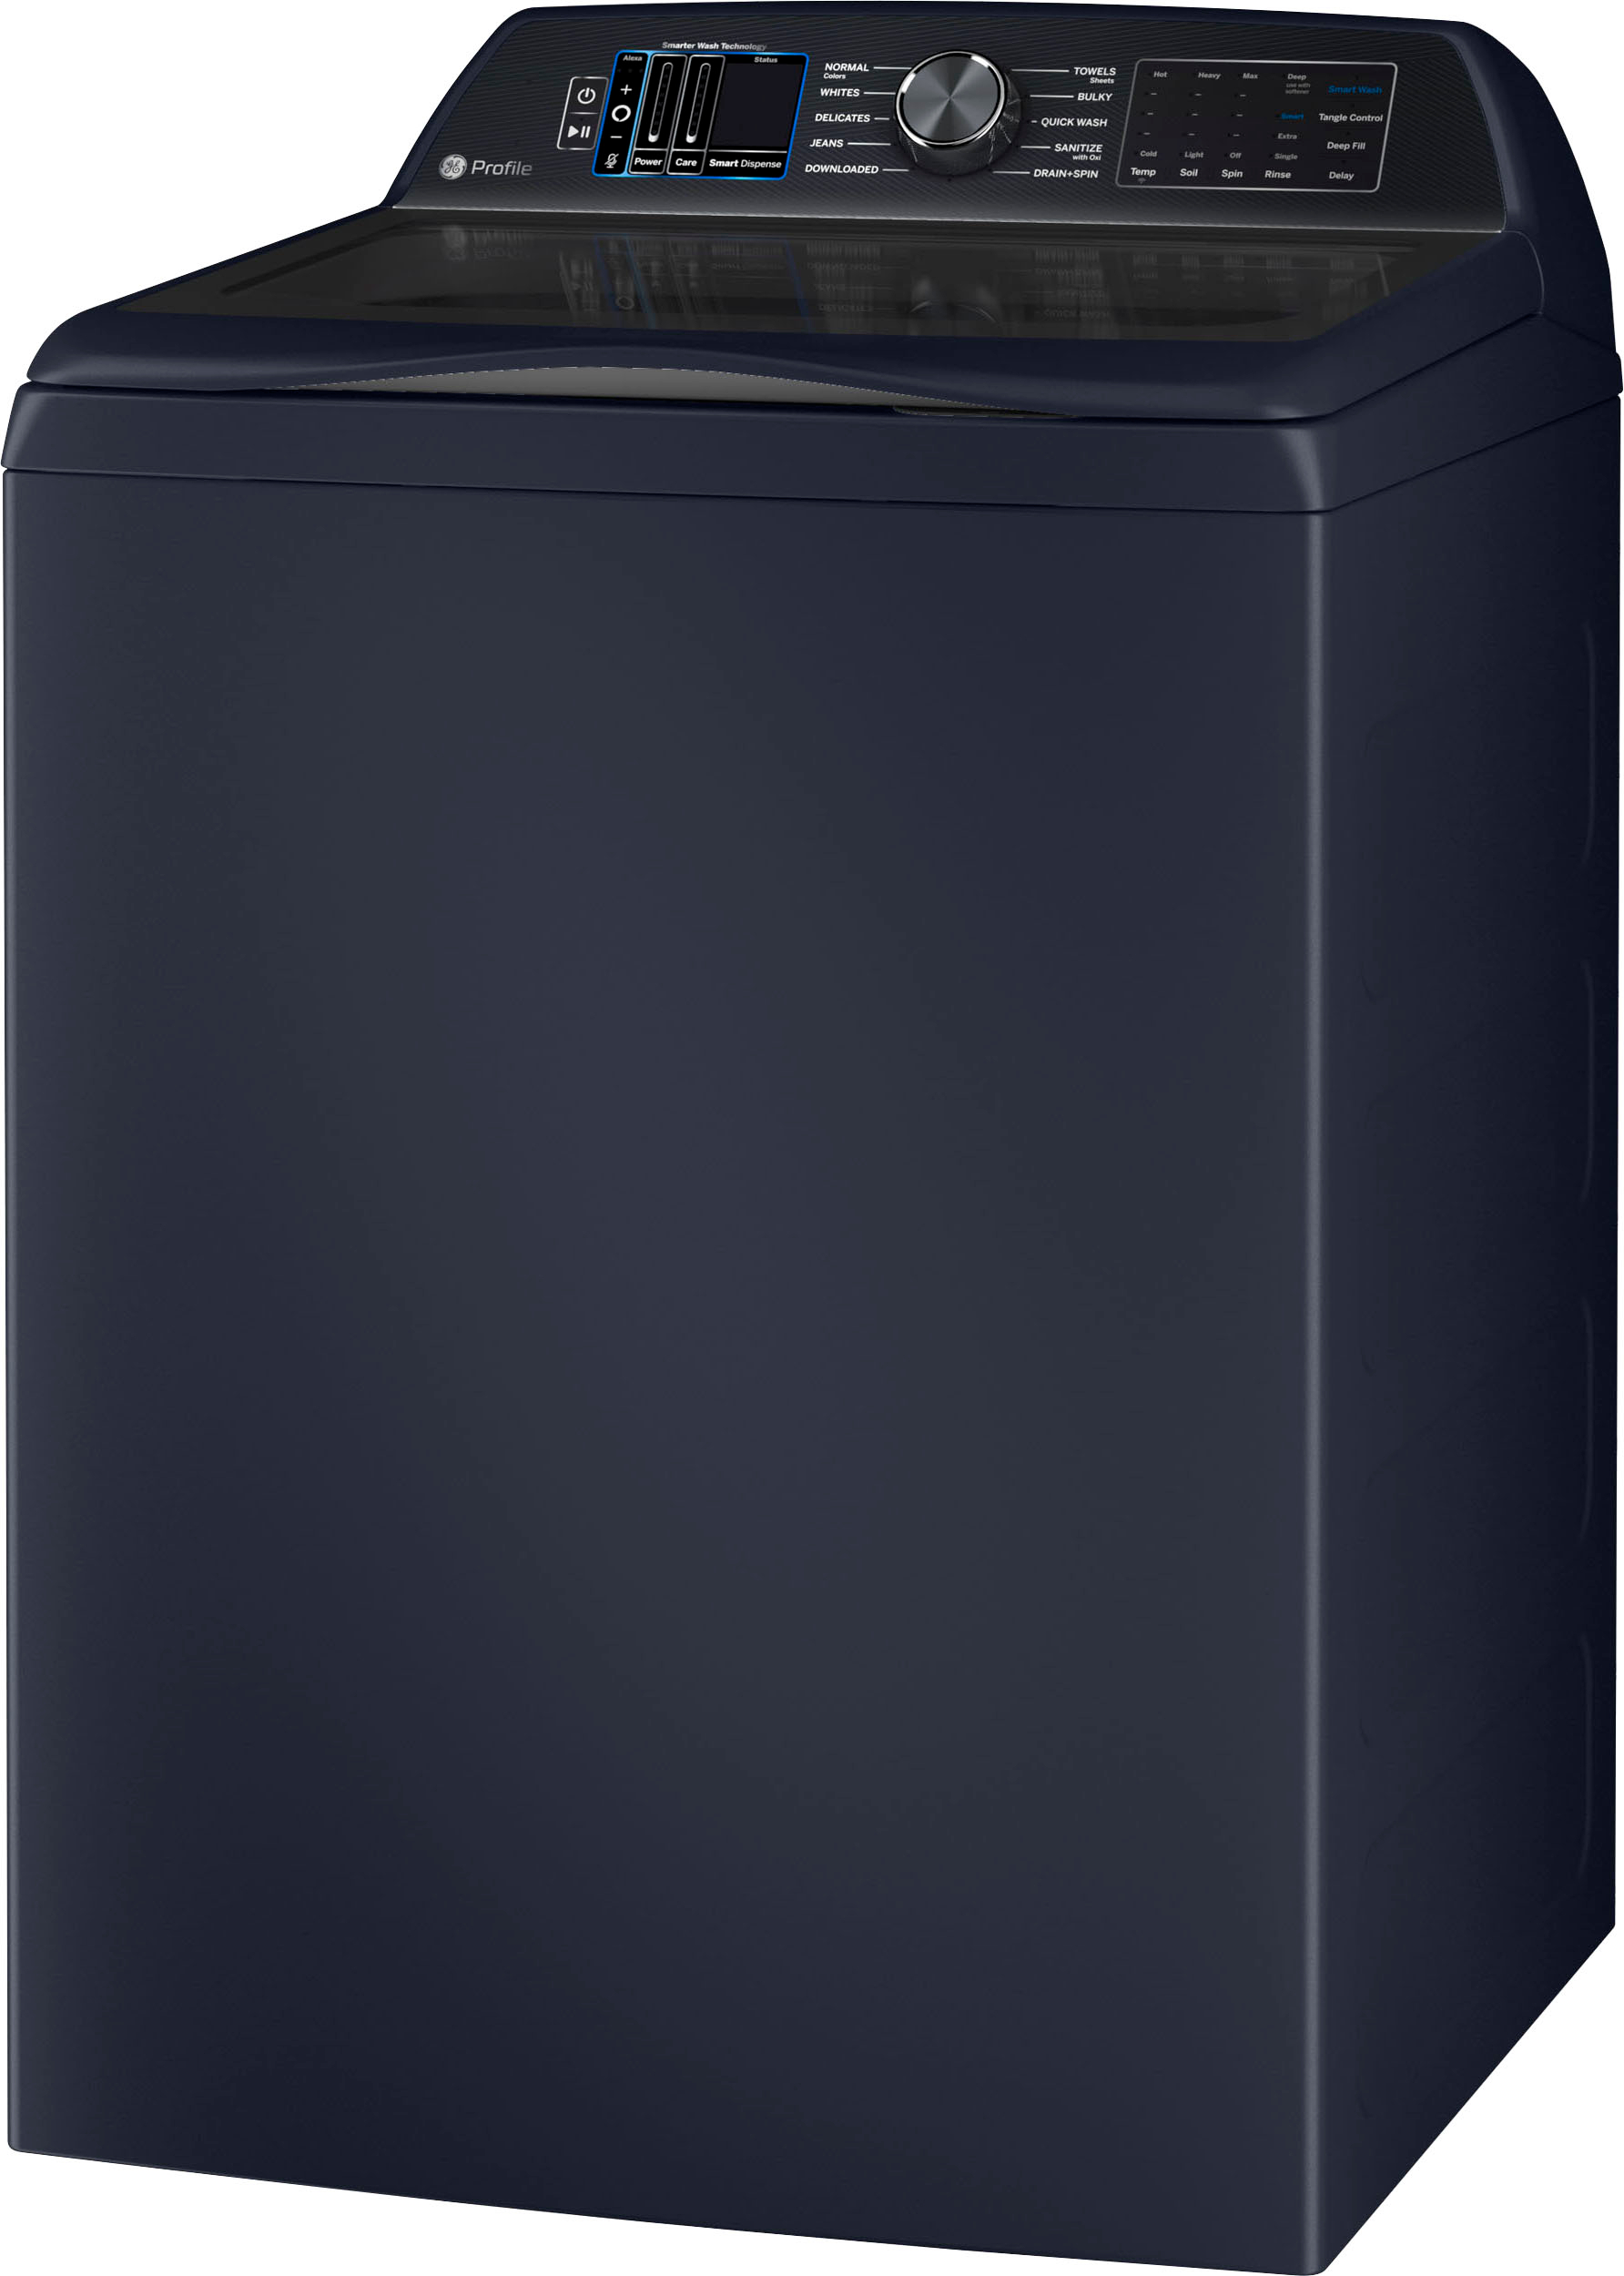 Left View: GE Profile - 5.4 Cu. Ft. High Efficiency Top Load Washer with Smarter Wash Technology, Easier Reach & Microban Technology - Sapphire Blue